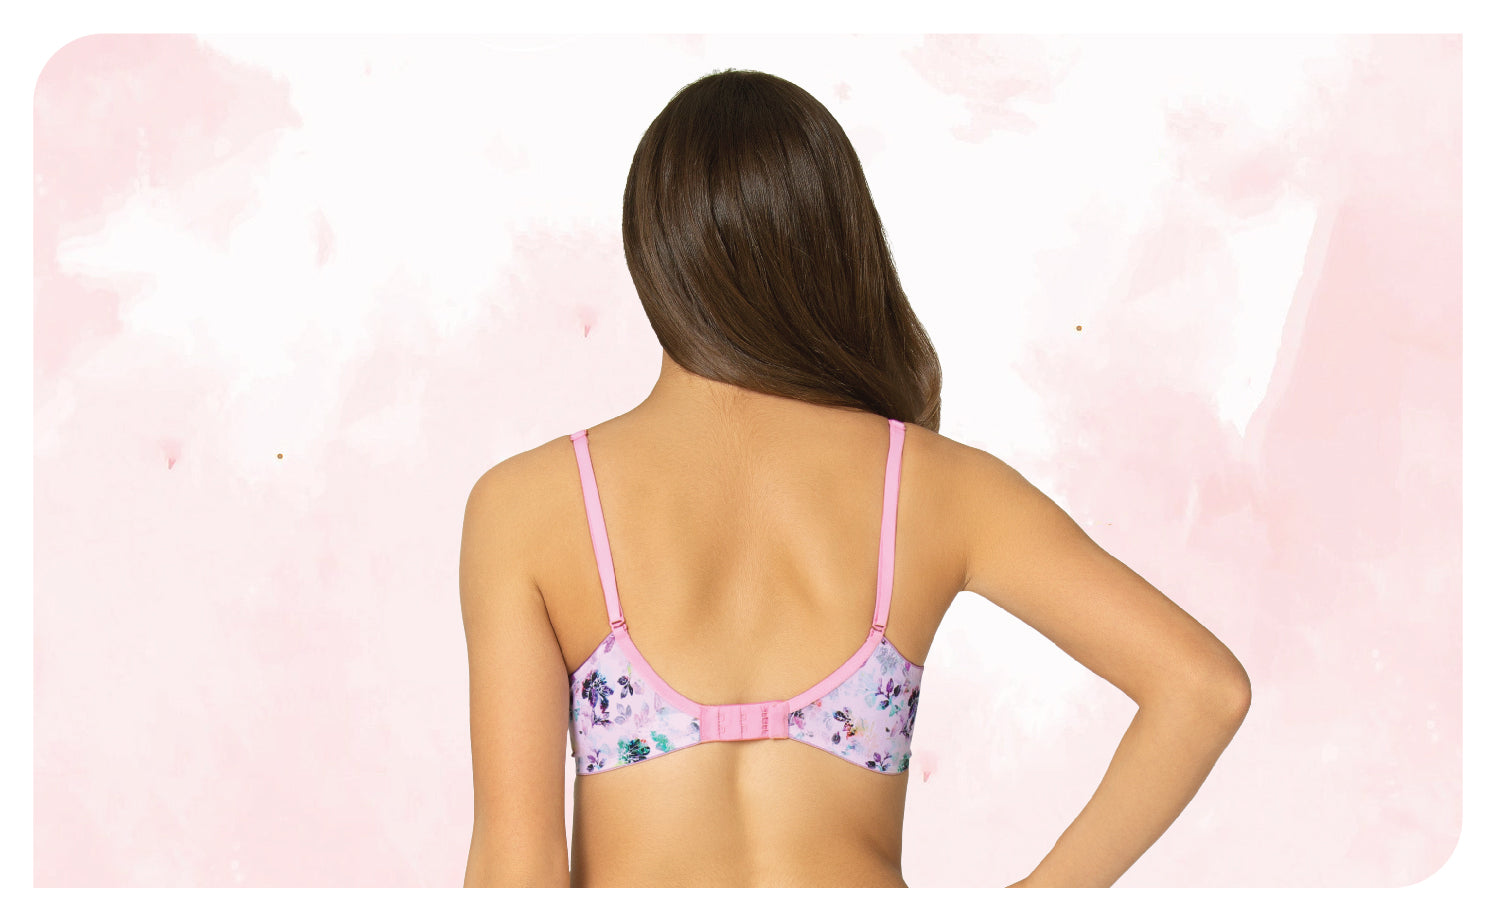 Why Does My Bra Look Lumpy Under Clothing? - ParfaitLingerie.com